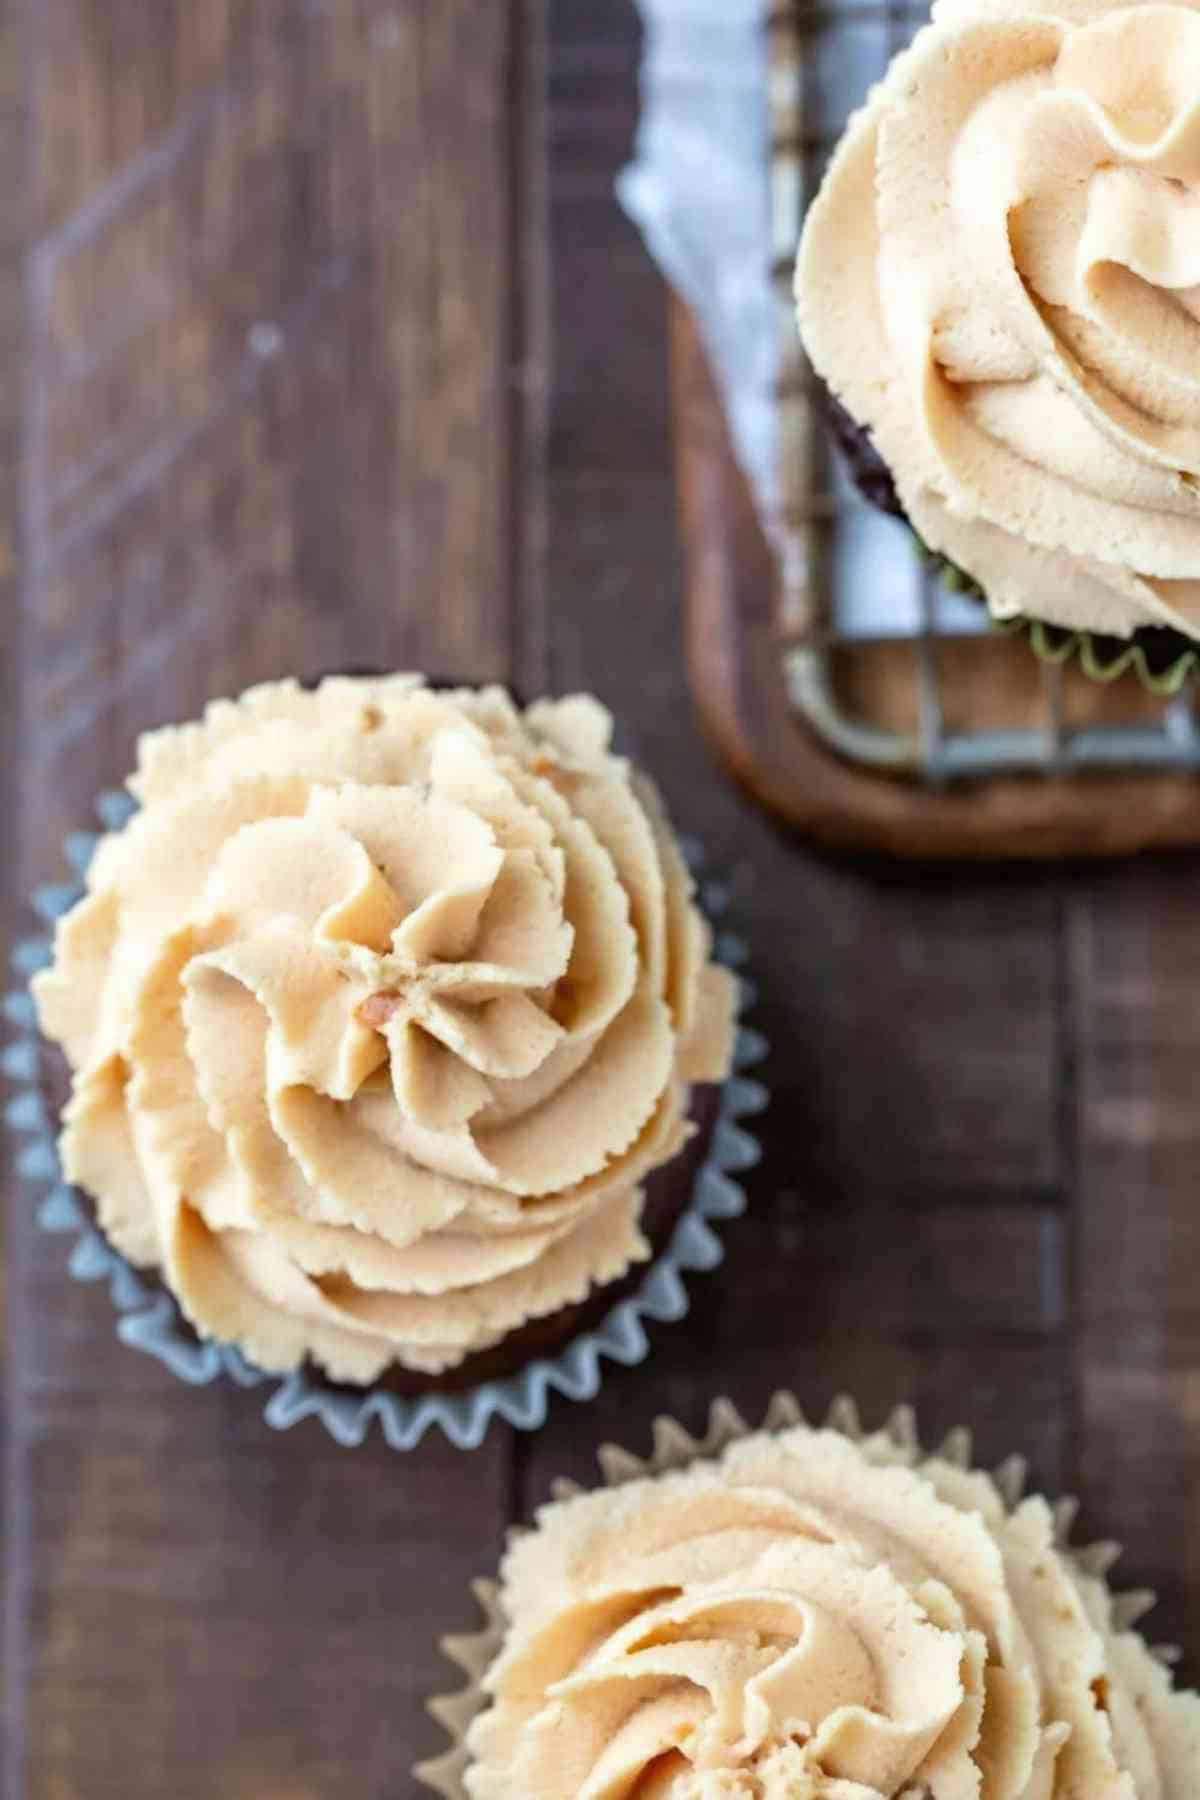 Peanut butter frosting on chocolate cupcake on a wooden background.